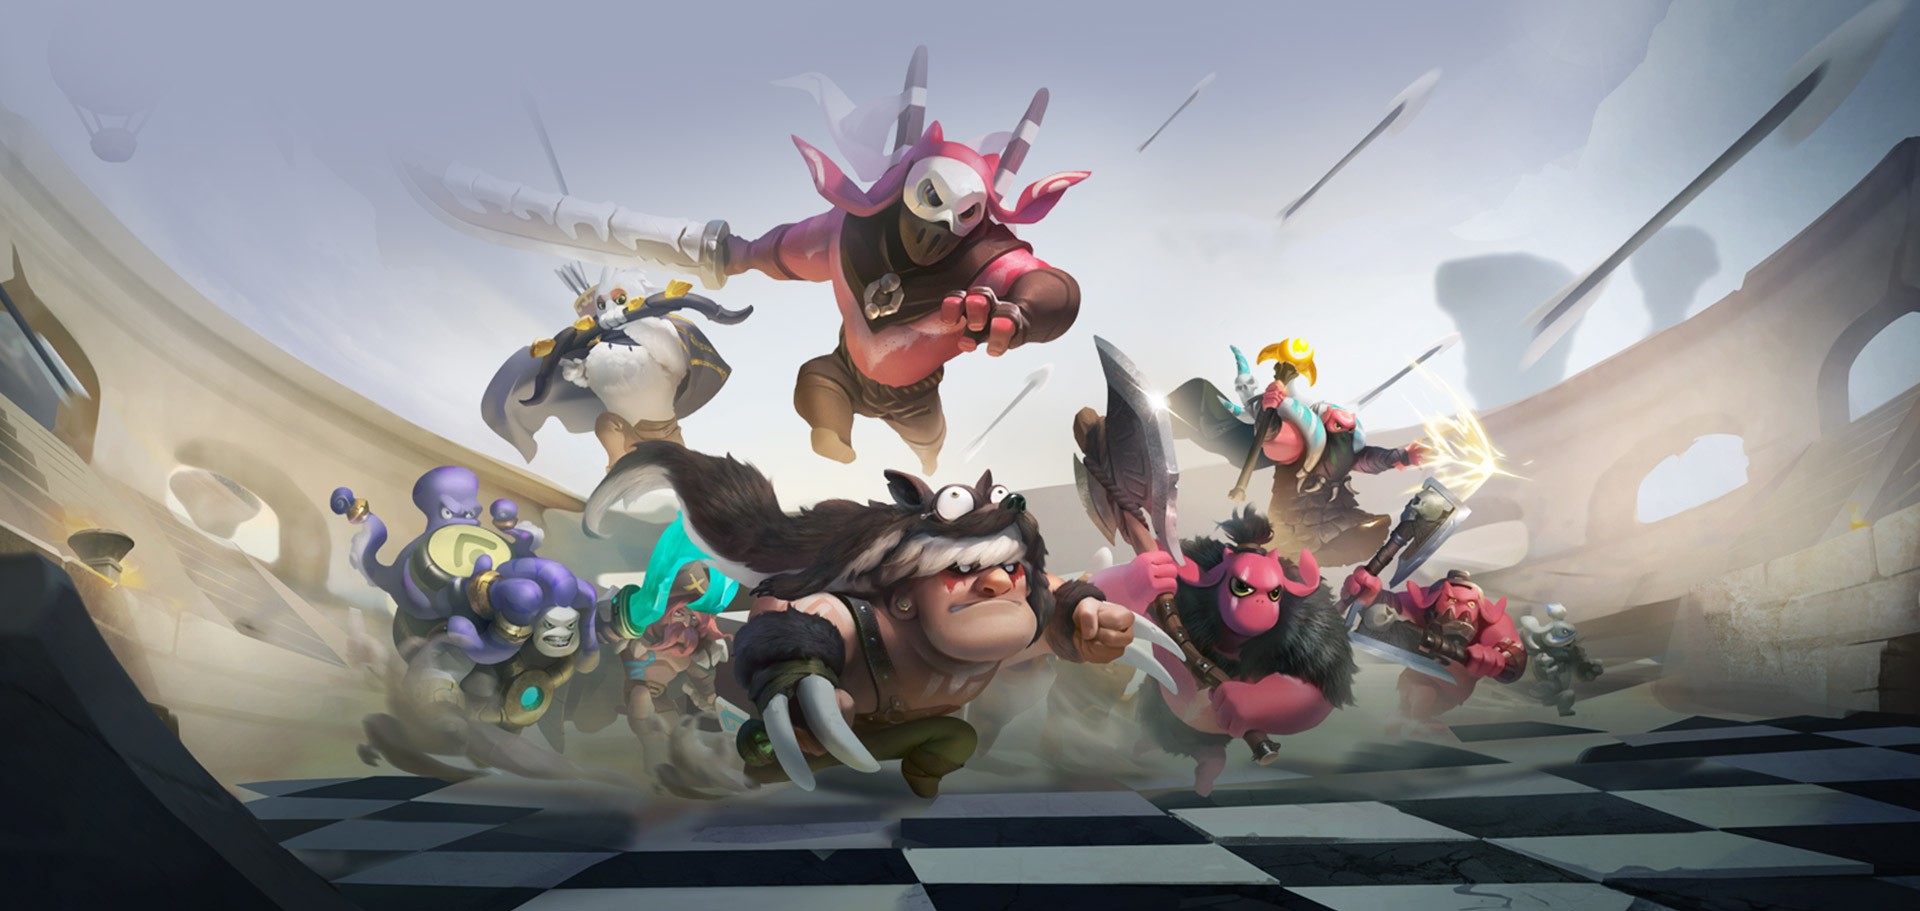 What is Auto Chess? From 'DOTA 2' Mod to Gaming Phenomenon